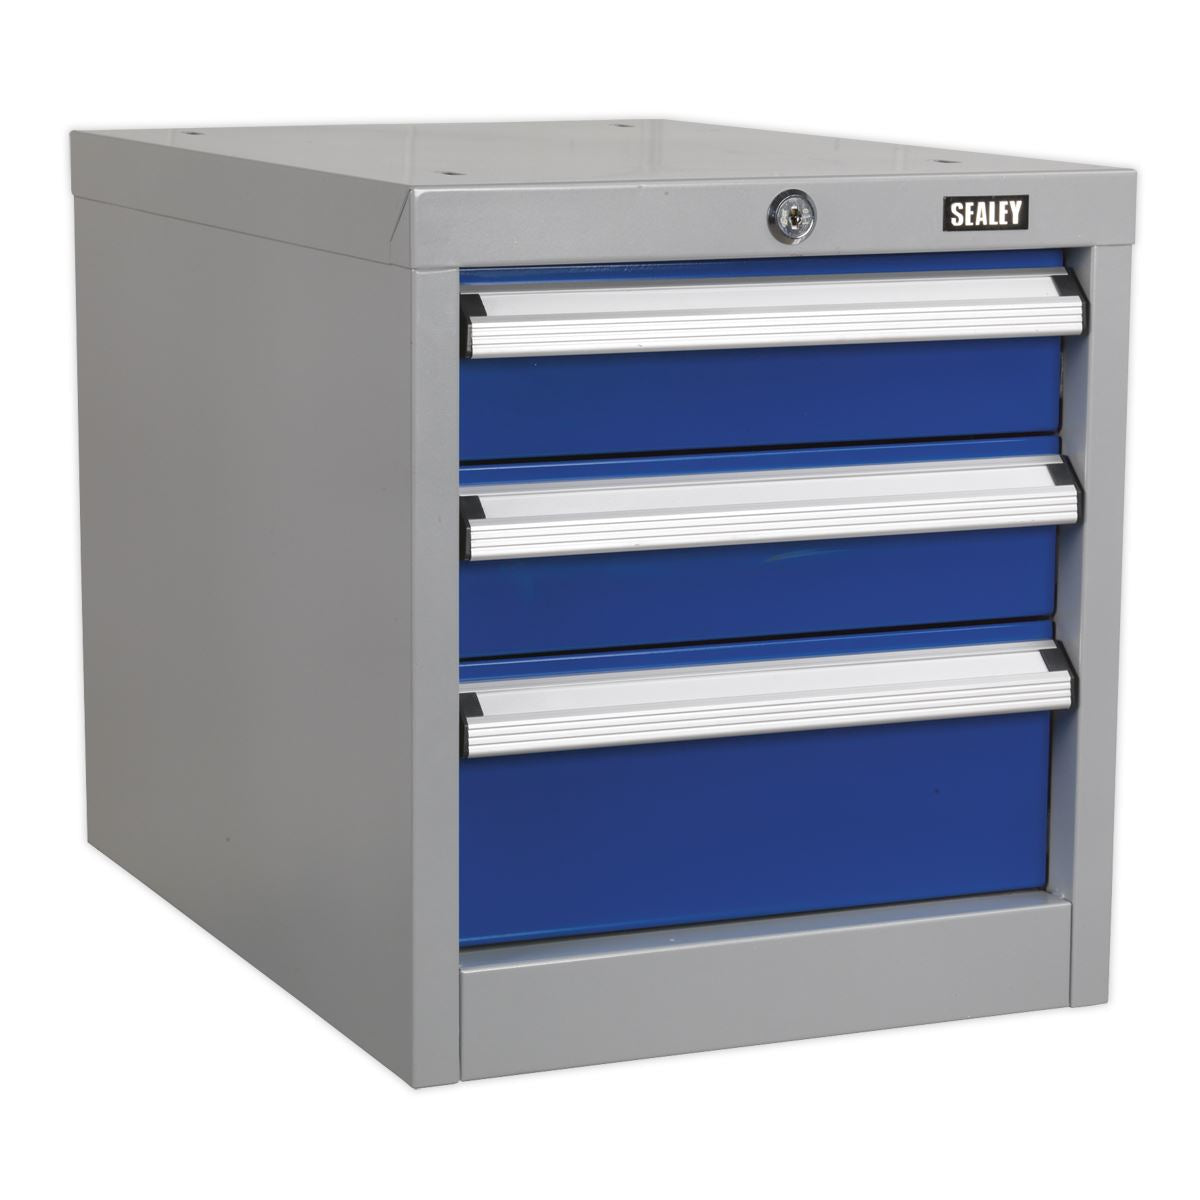 Sealey Premier Industrial Industrial Triple Drawer Unit for API Series Workbenches